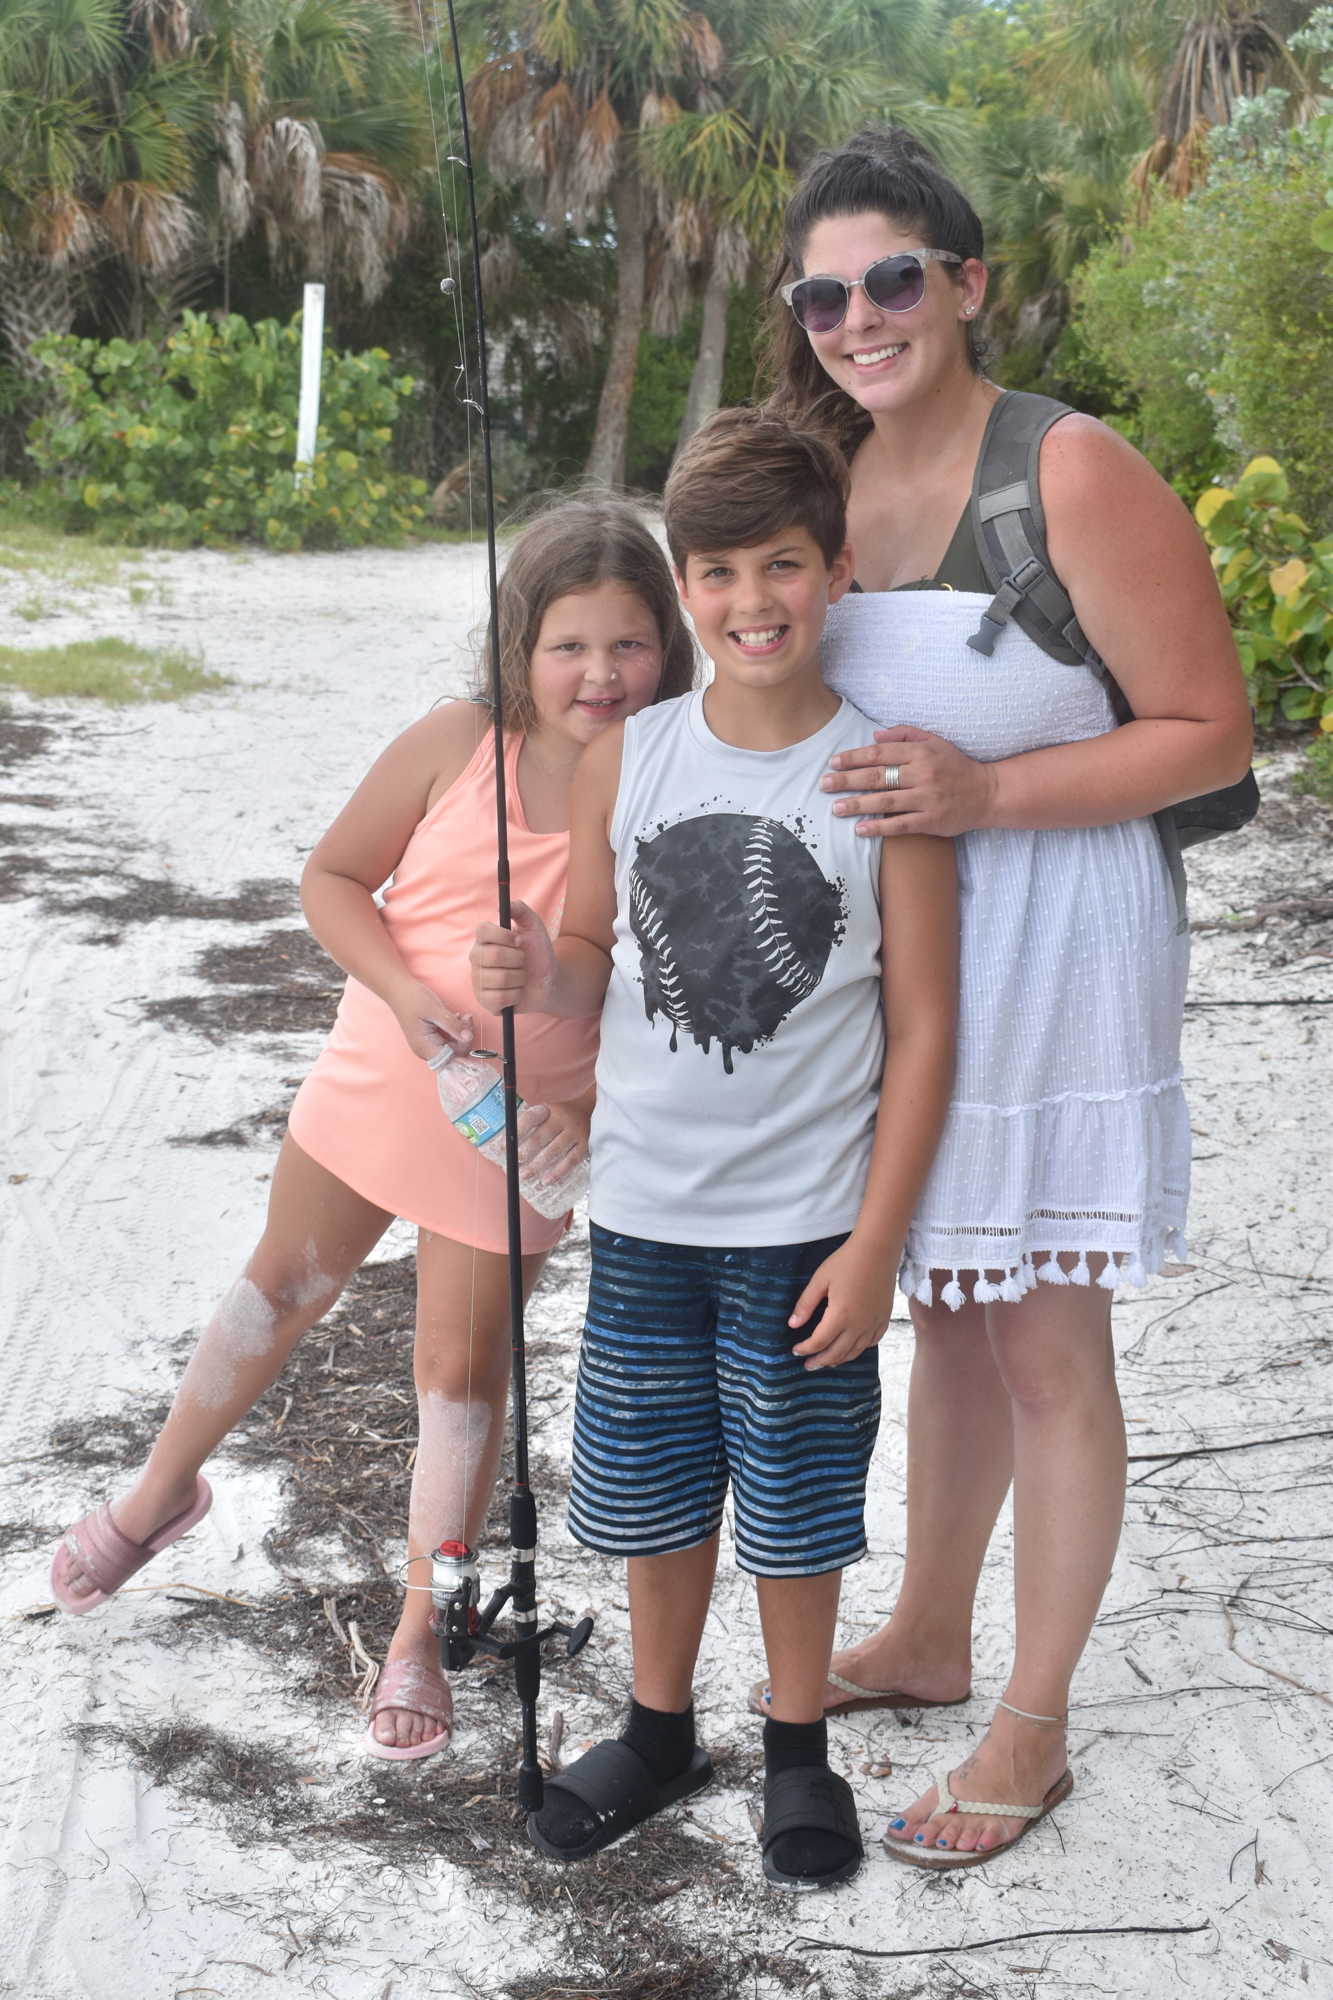 Jessica Lemmer brought her children Tatum and Peyton to Quick Point Nature Preserve to go fishing.